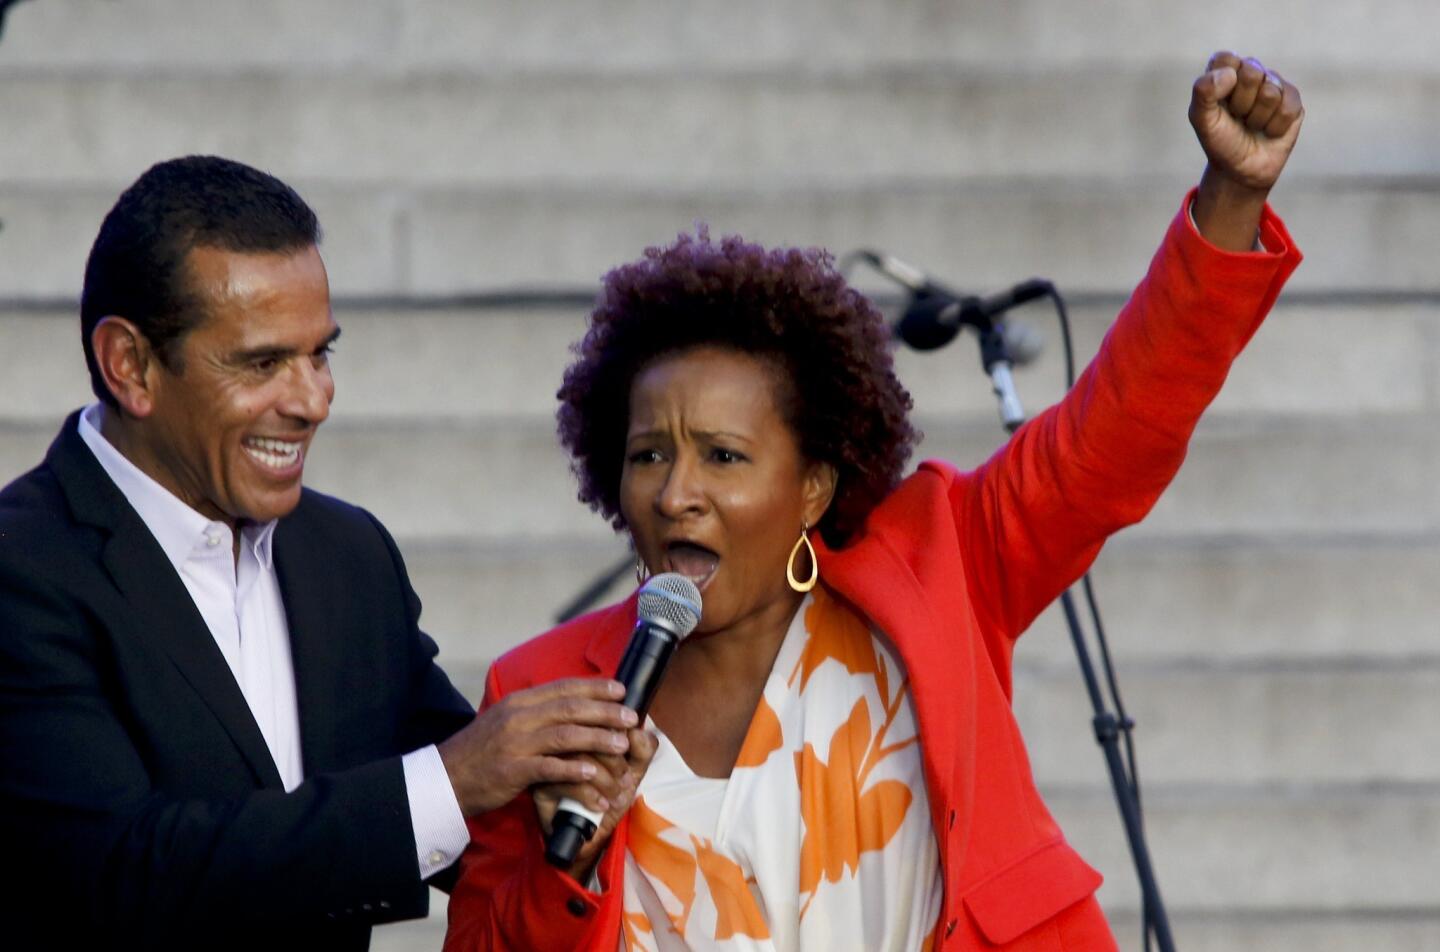 Comedian Wanda Sykes, right, performs alongside Mayor Antonio Villaraigosa during the Celebrate LA! Block Party at downtown's Grand Park. The boisterous bash was mostly about celebrating Villaraigosa's two terms as mayor.